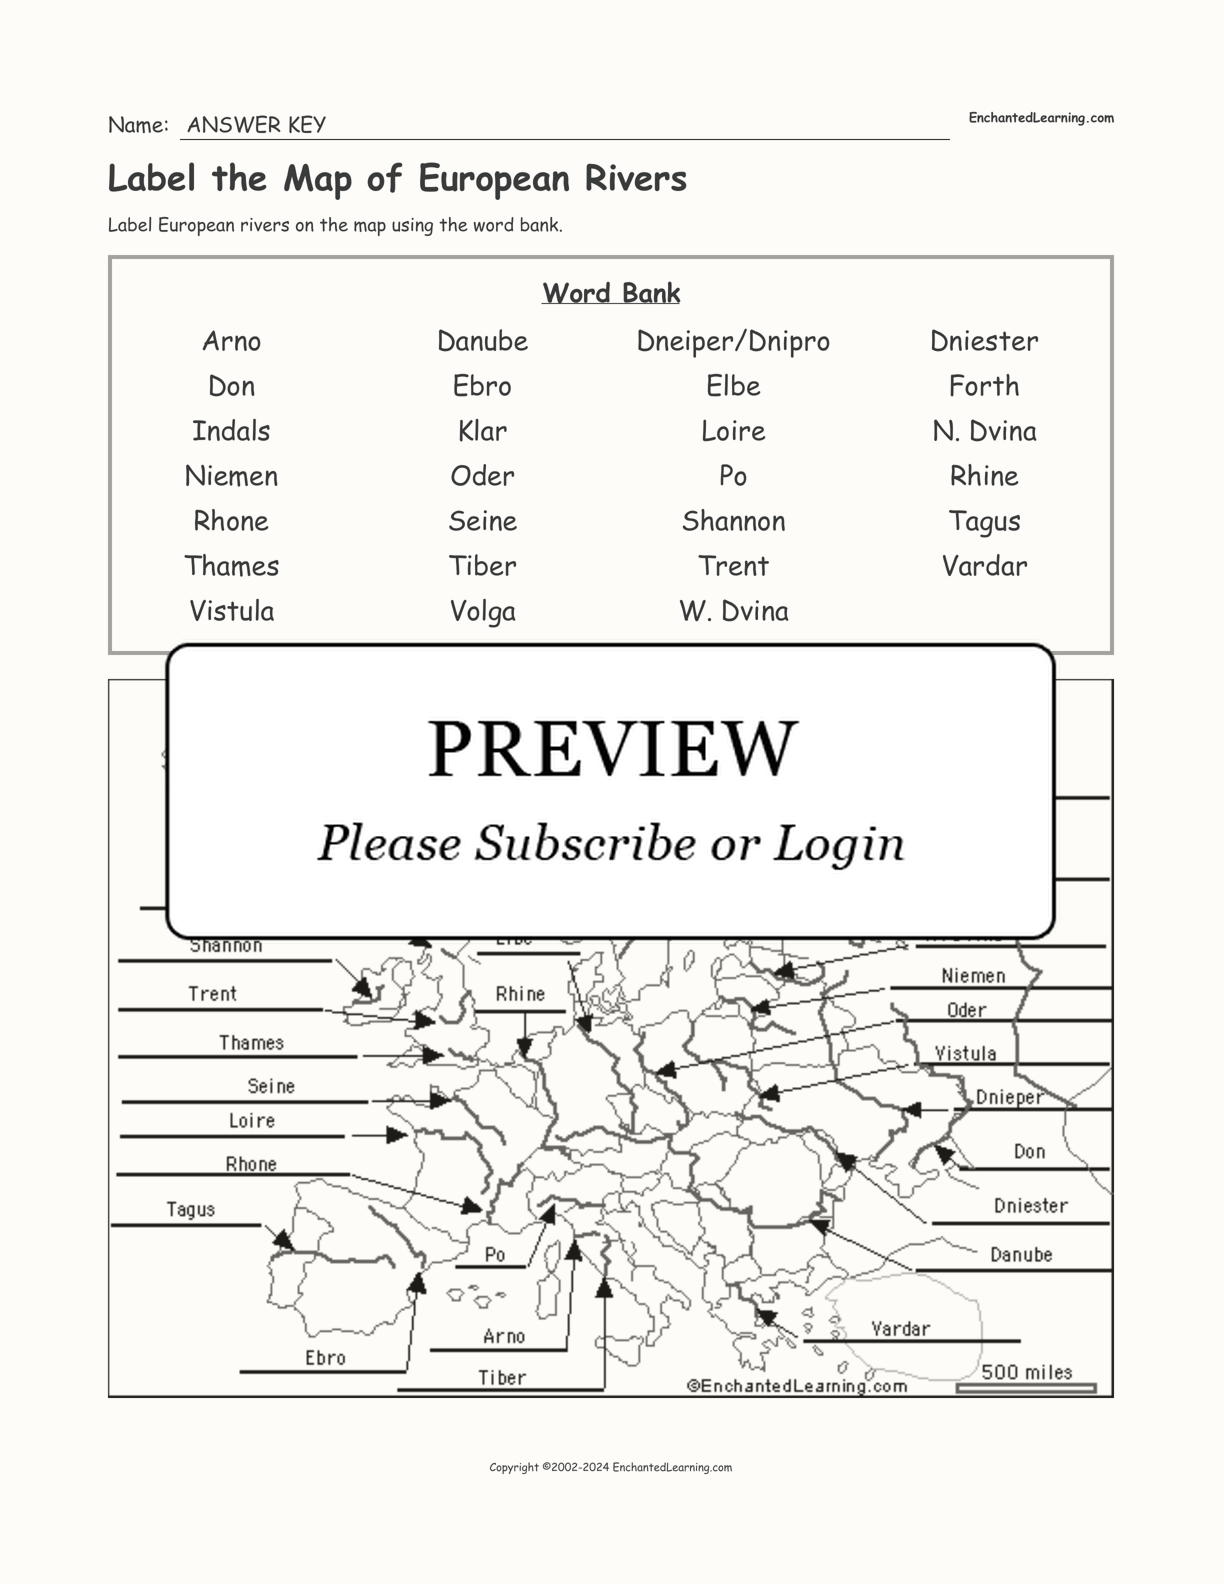 Label the Map of European Rivers interactive worksheet page 2